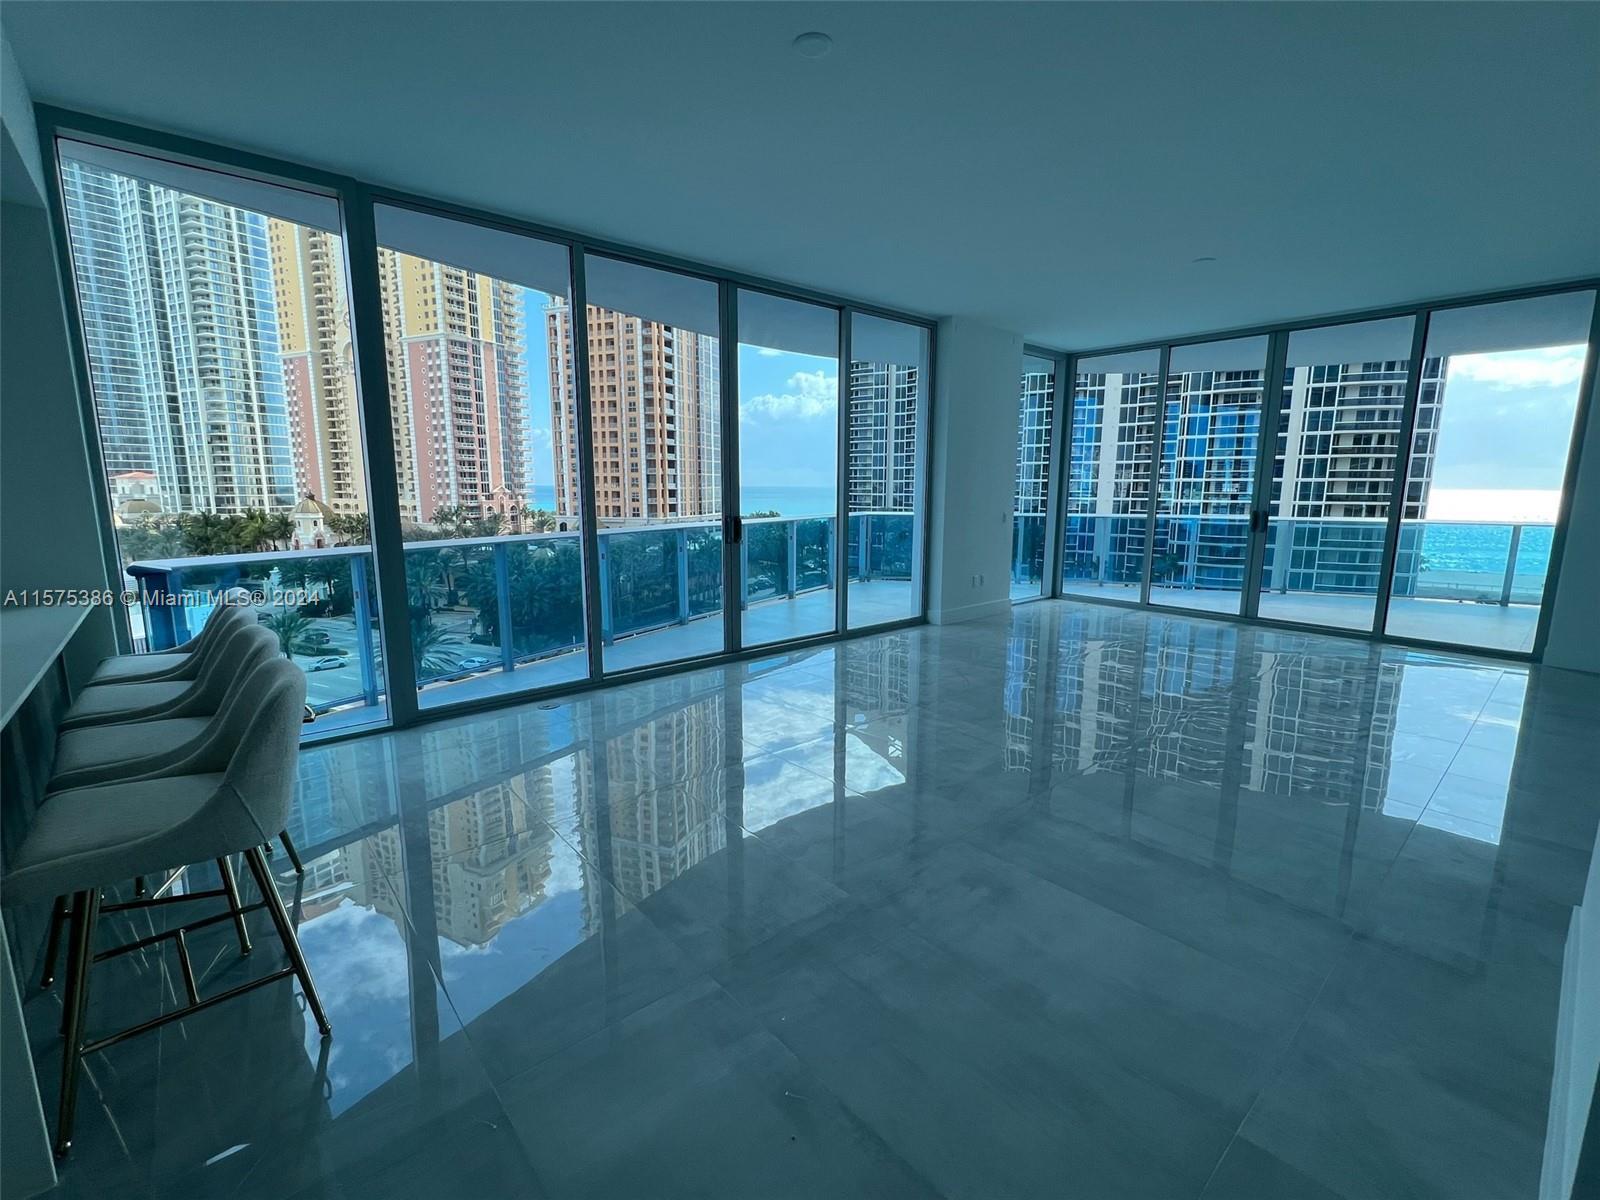 Photo of 17550 Collins #705 in Sunny Isles Beach, FL